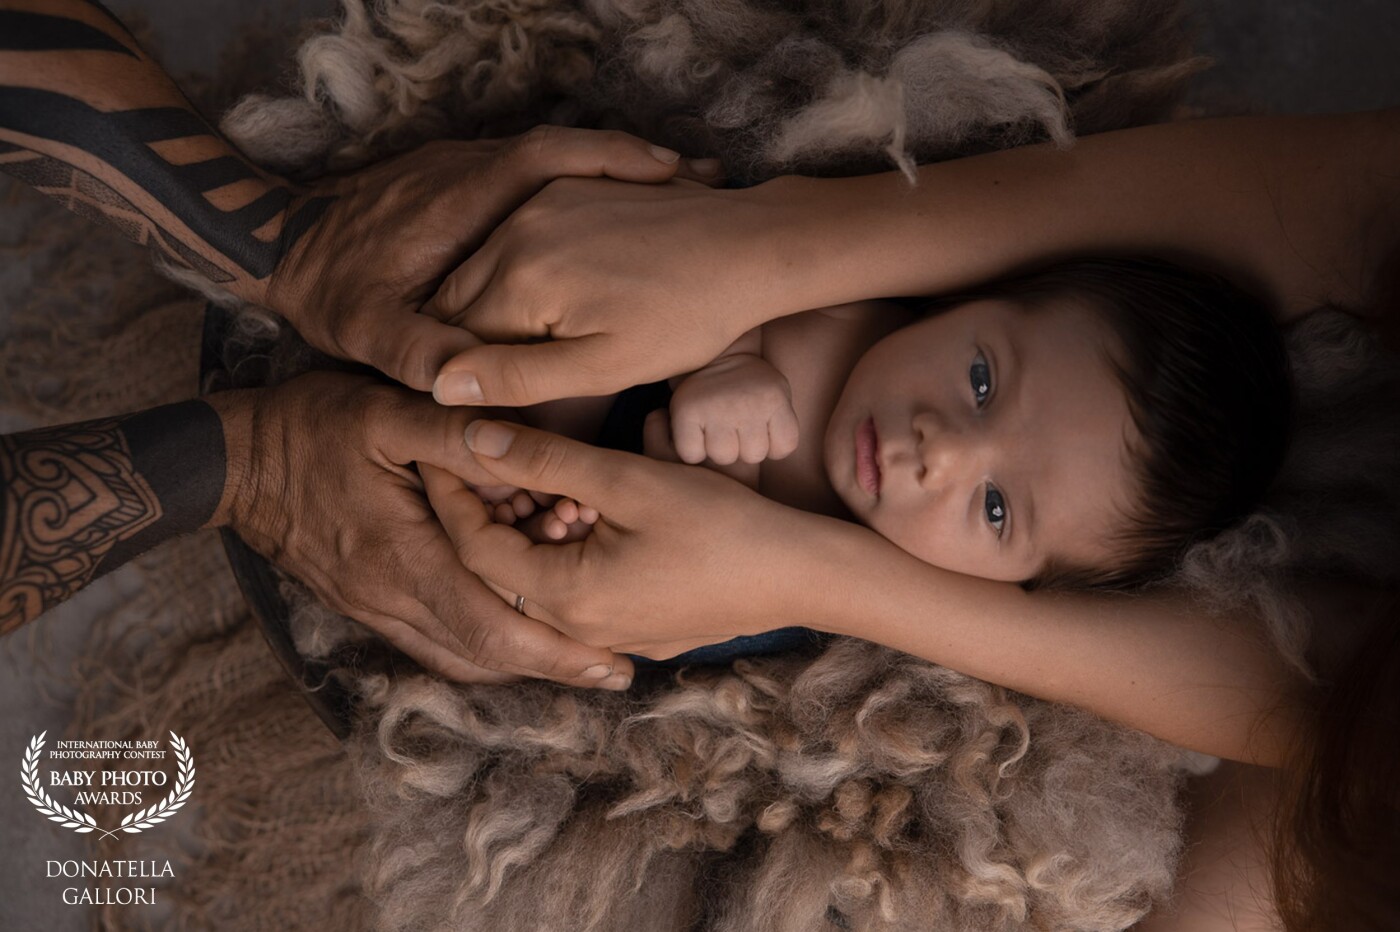 The safest place in the world<br />
<br />
The wonder of Tommaso's gaze, 14 days old, in the sure embrace of mom and dad. The details of the hands suggest the emotion and love of these two new parents in a tender and delicate way